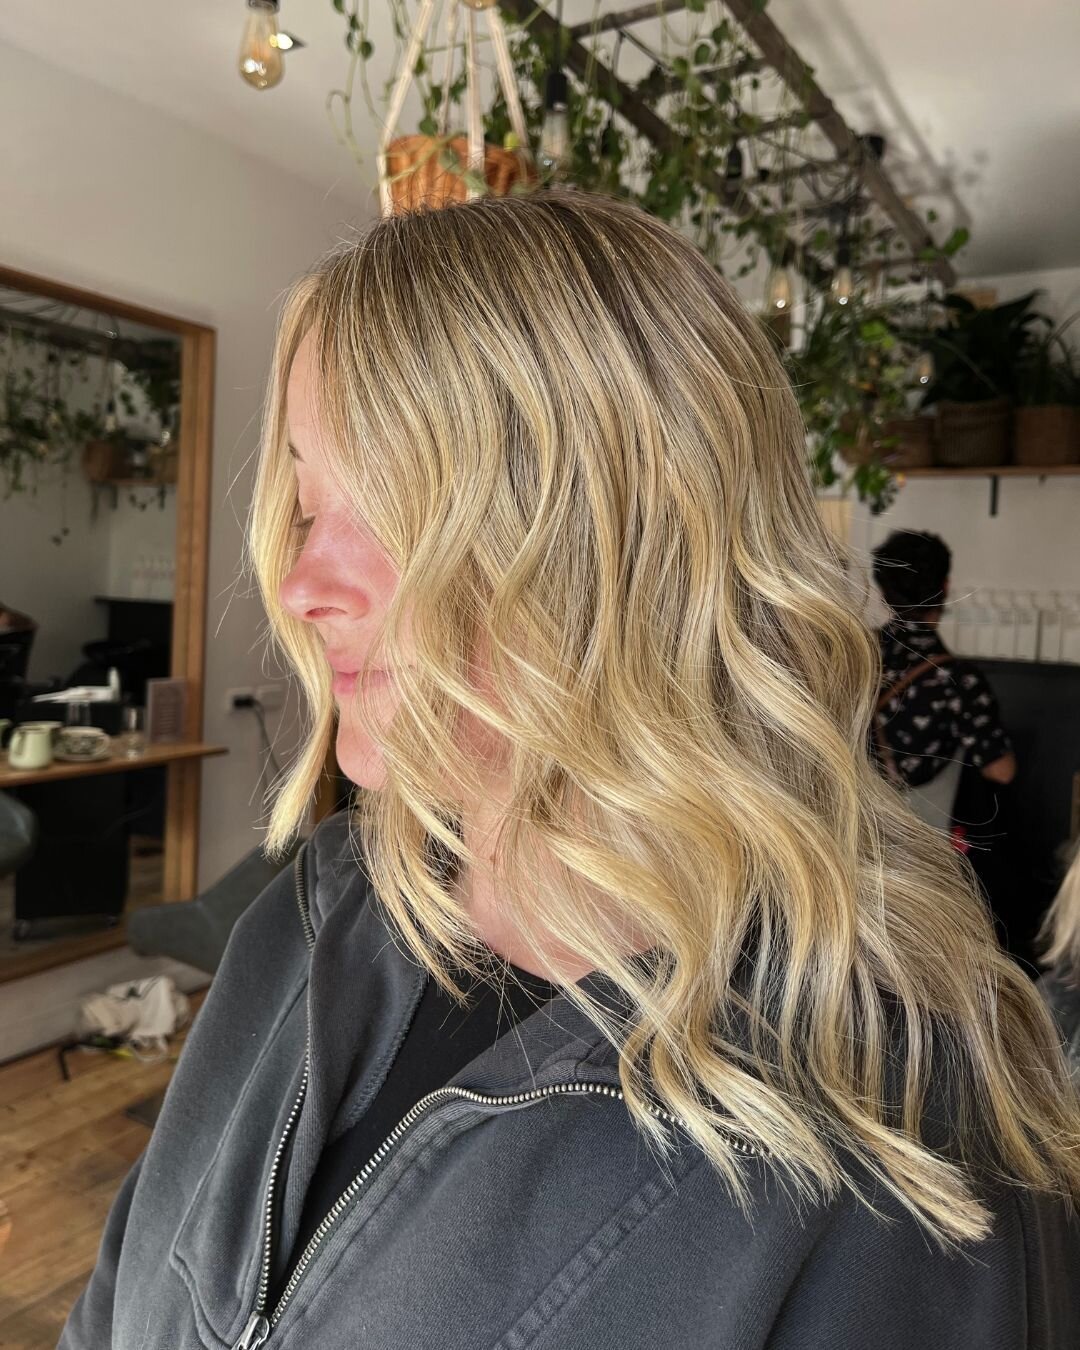 Embracing the warmth of golden hues, one strand at a time ☀️💛

Created by Tyra ~ Book your next appointment with Tyra, she's available Tuesday to Friday ✨

www.arrowtownhair.nz / 03 442 0515

#blonde #goldenblonde #hairgoals #blondehair #hairdresser